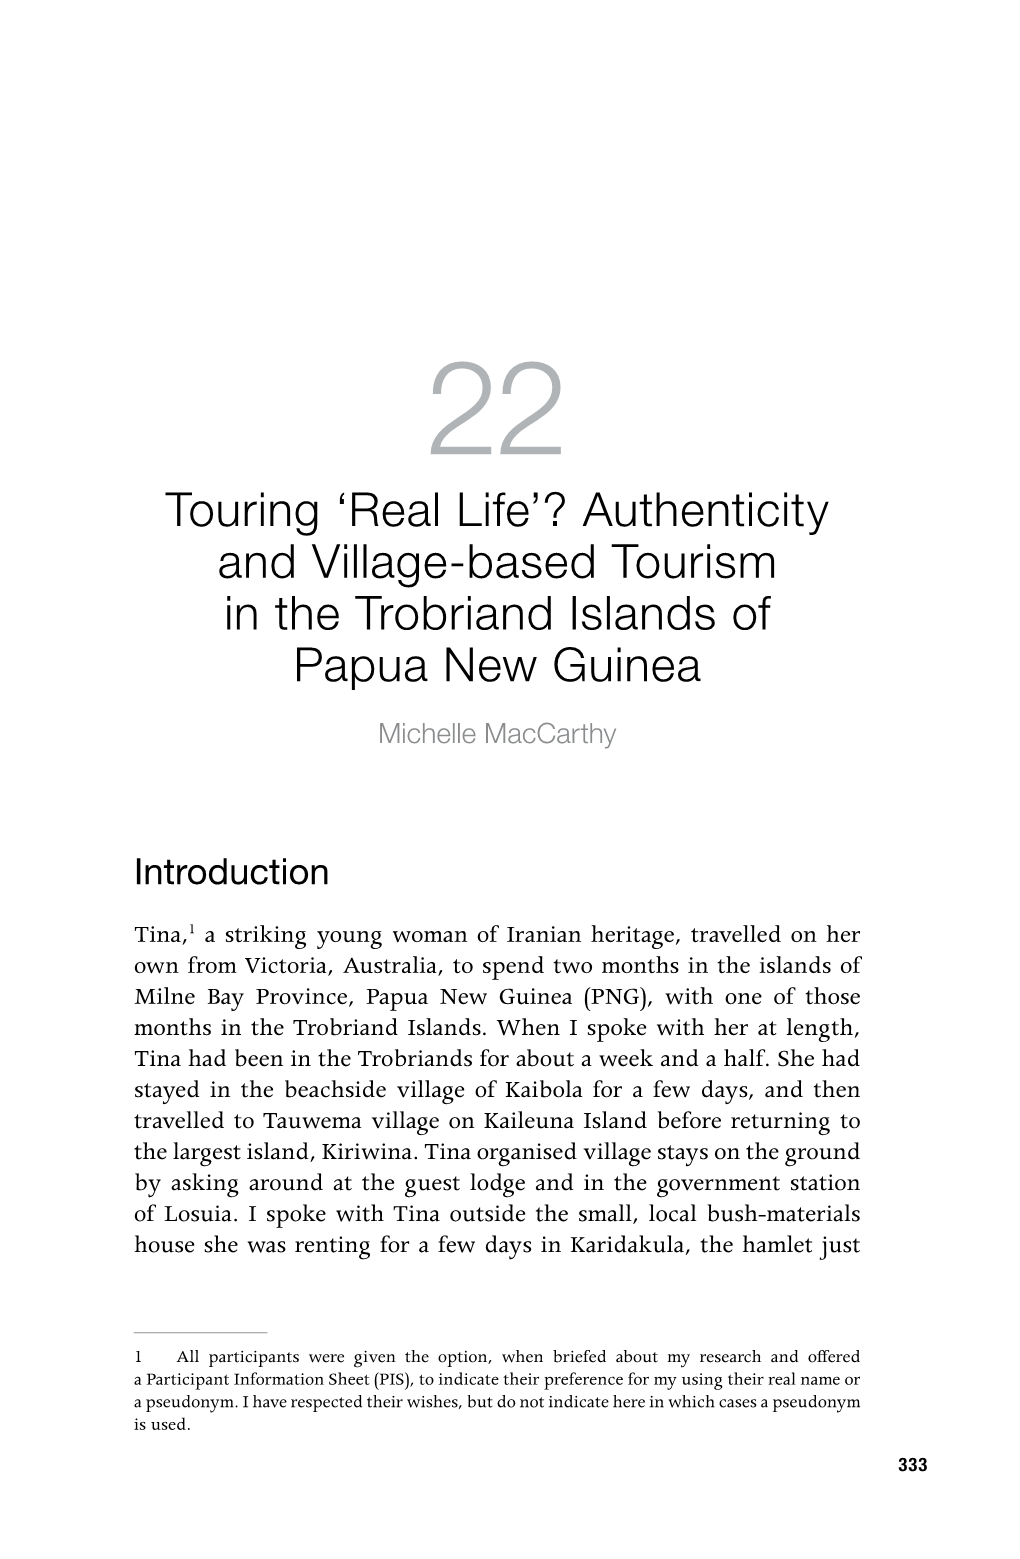 Authenticity and Village-Based Tourism in the Trobriand Islands of Papua New Guinea Michelle Maccarthy